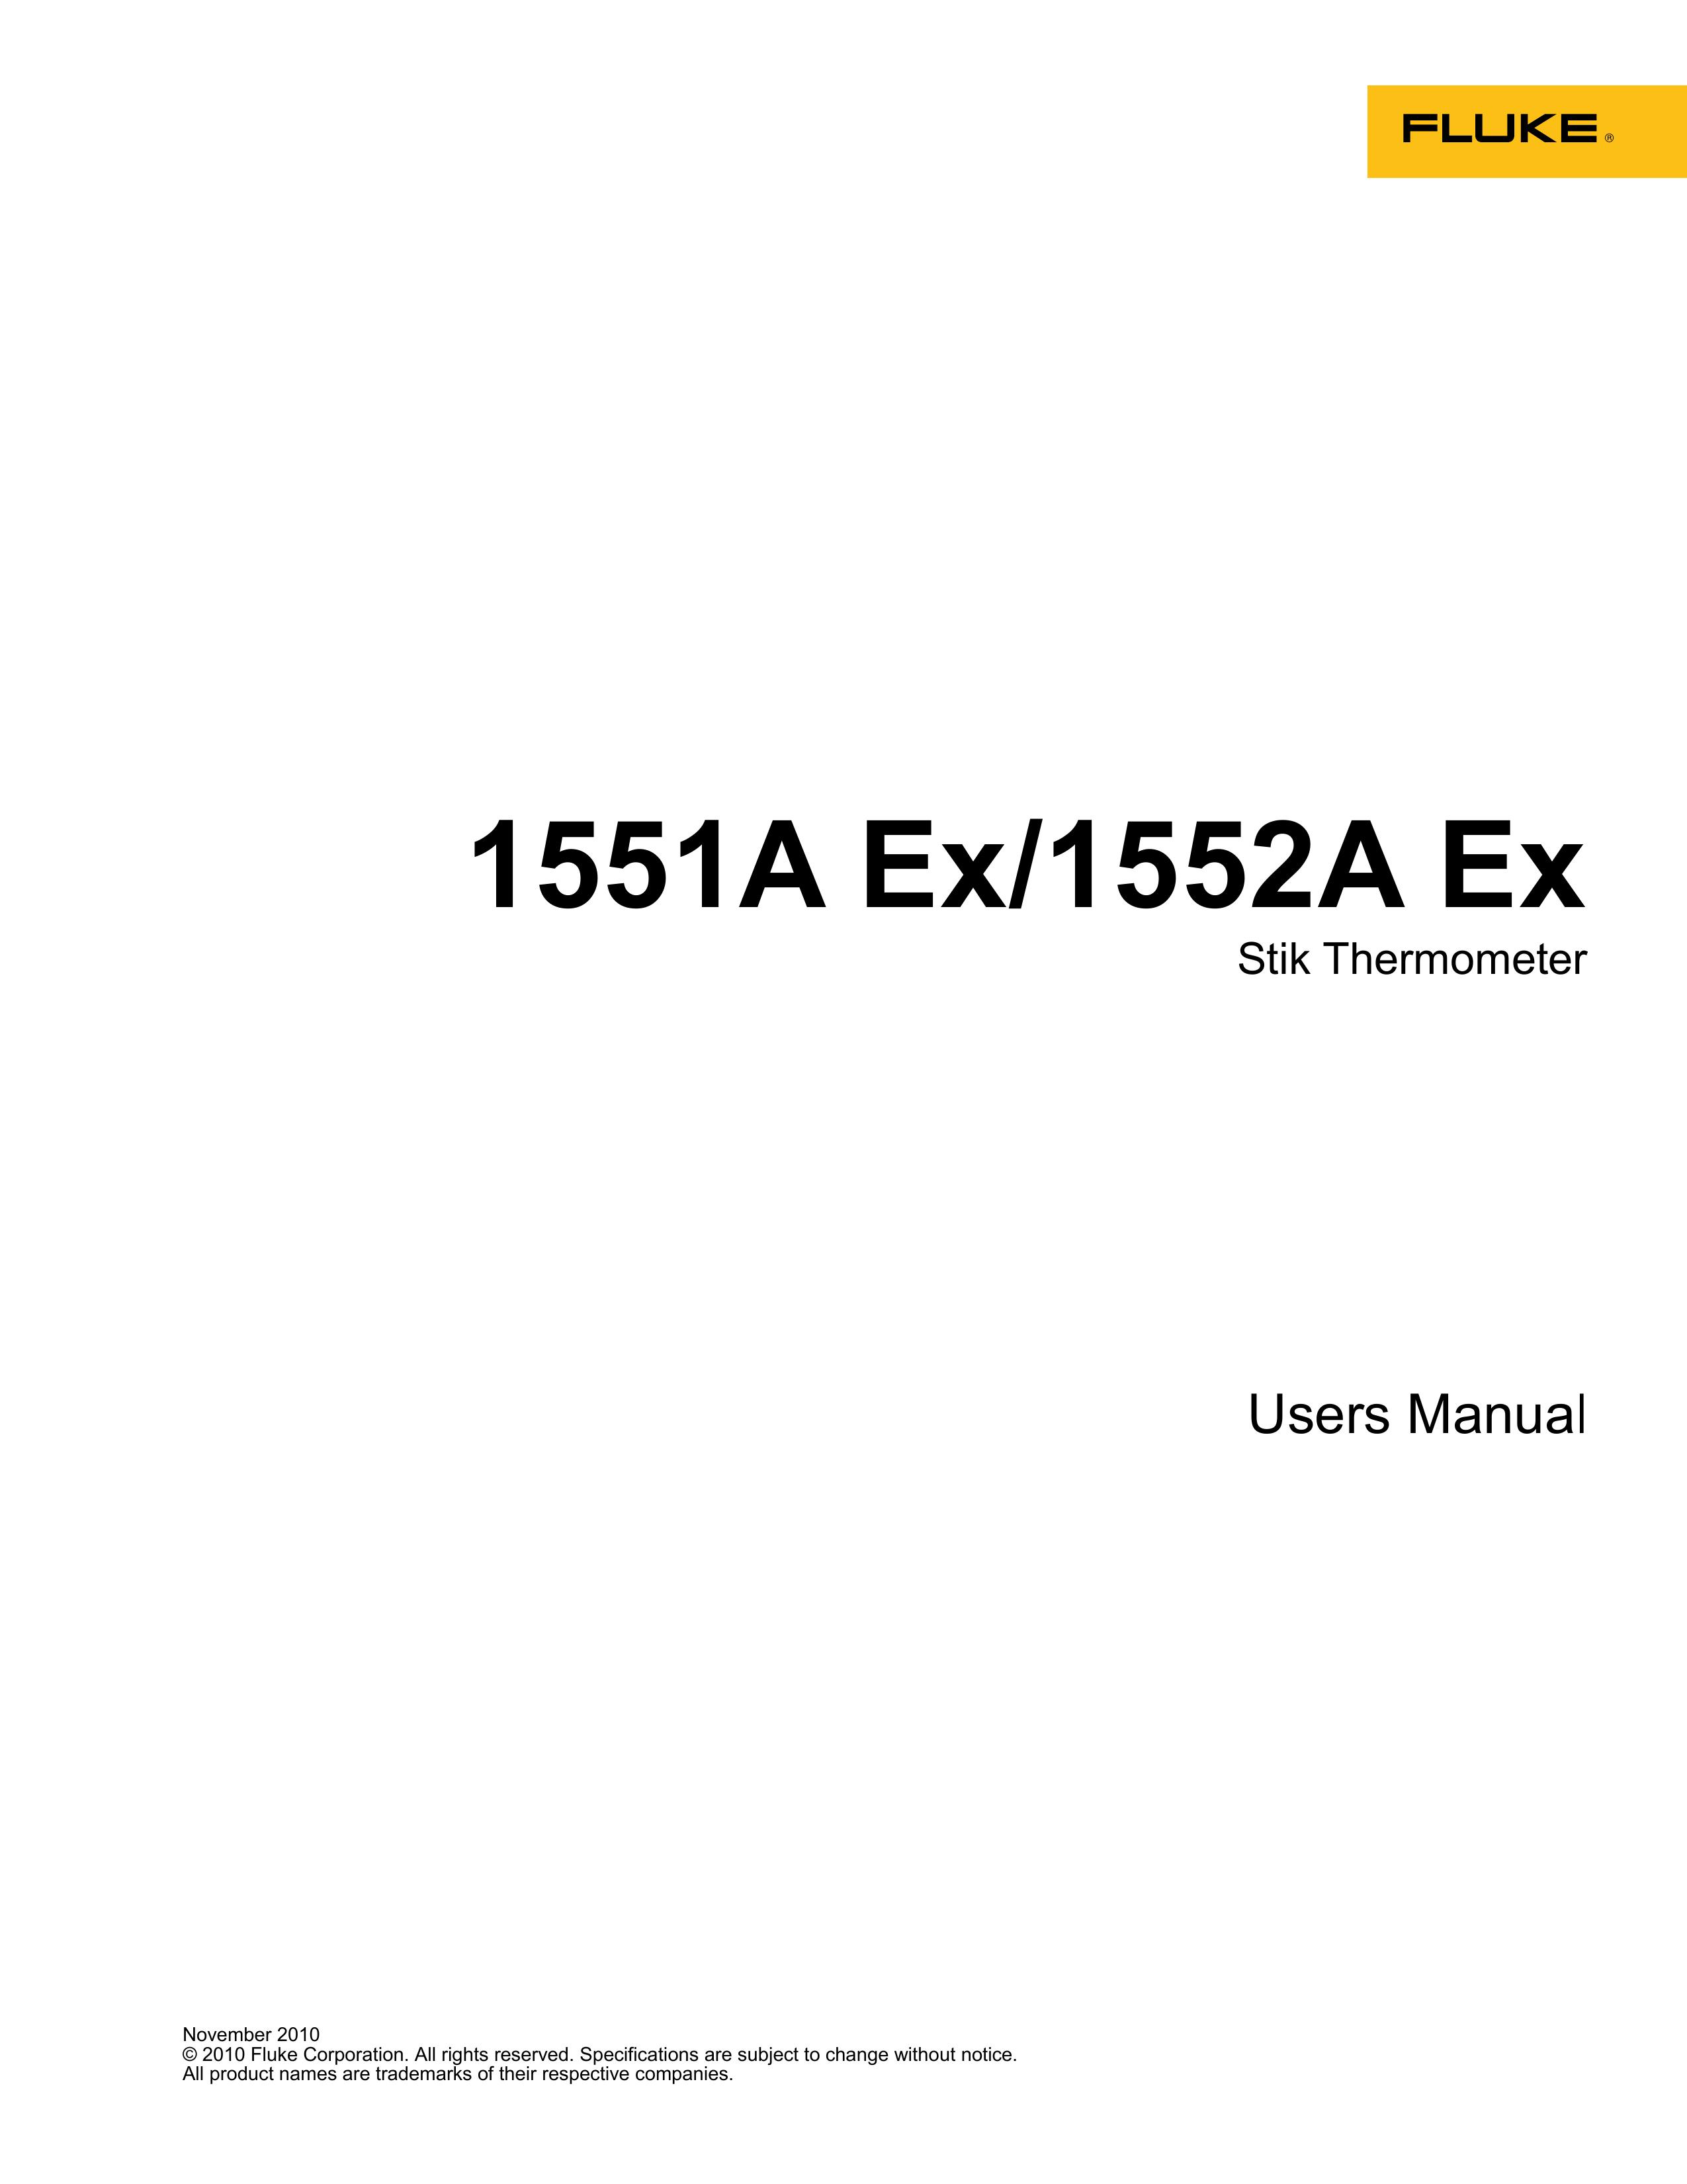 Fluke 1552A EX Thermometer User Manual